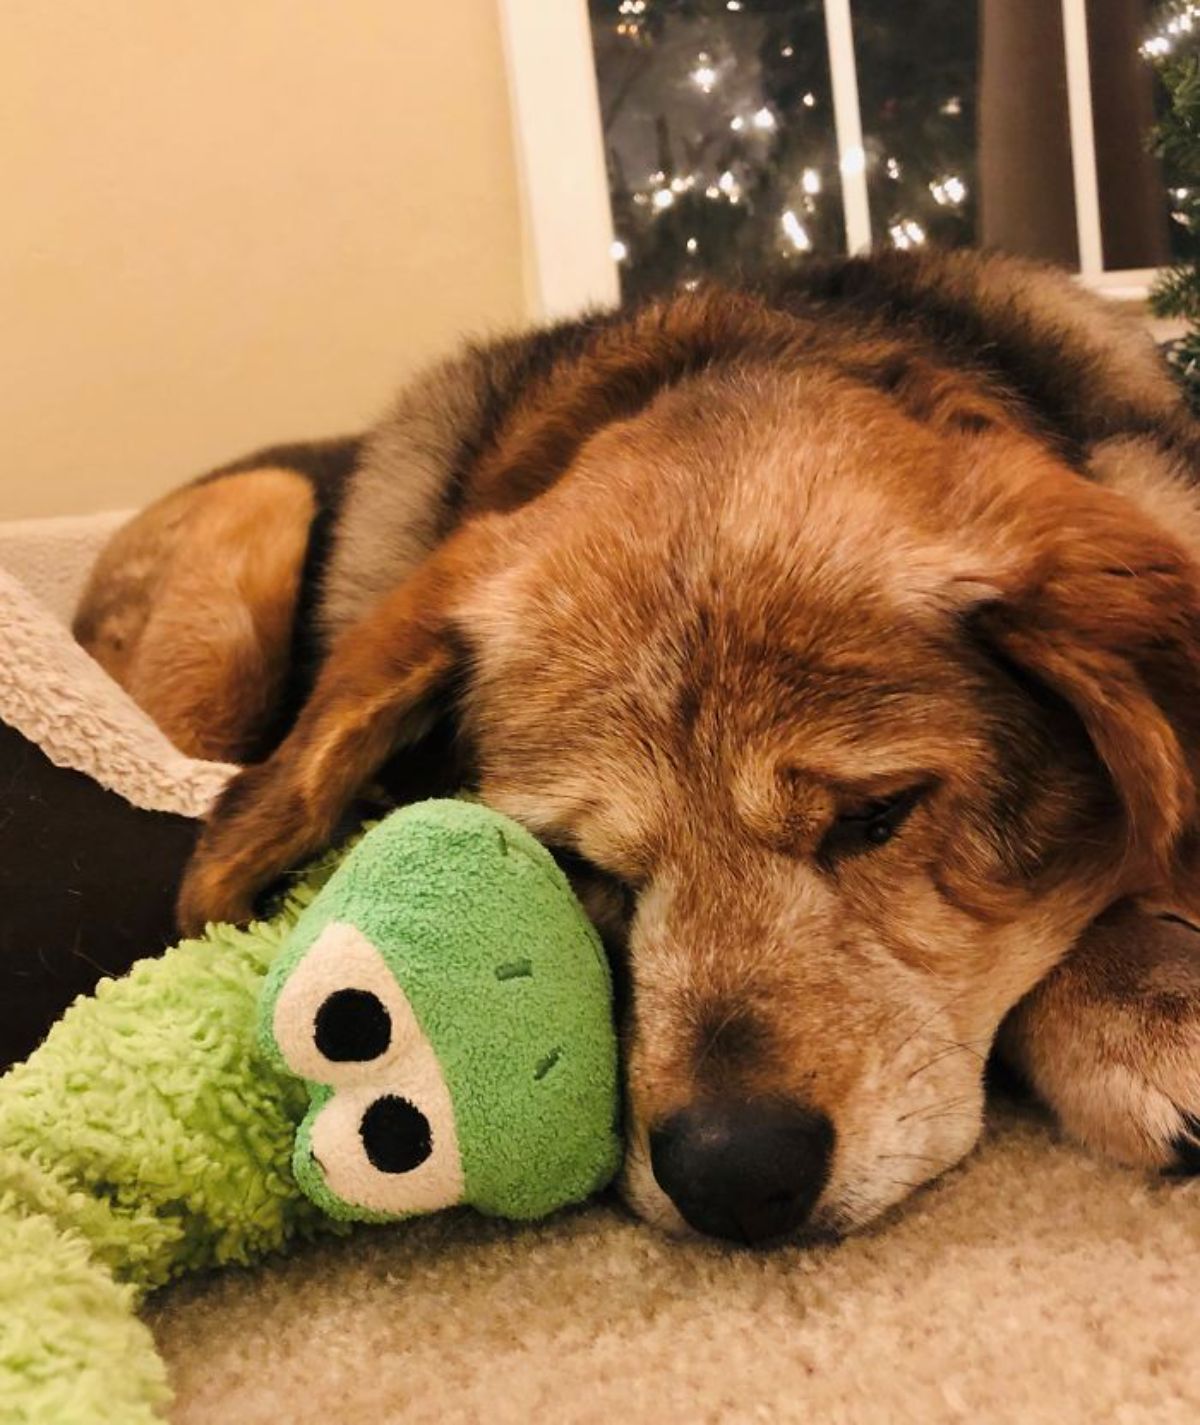 old fluffy brown dog laying on the floor with a green frog stuffed toys next to its face